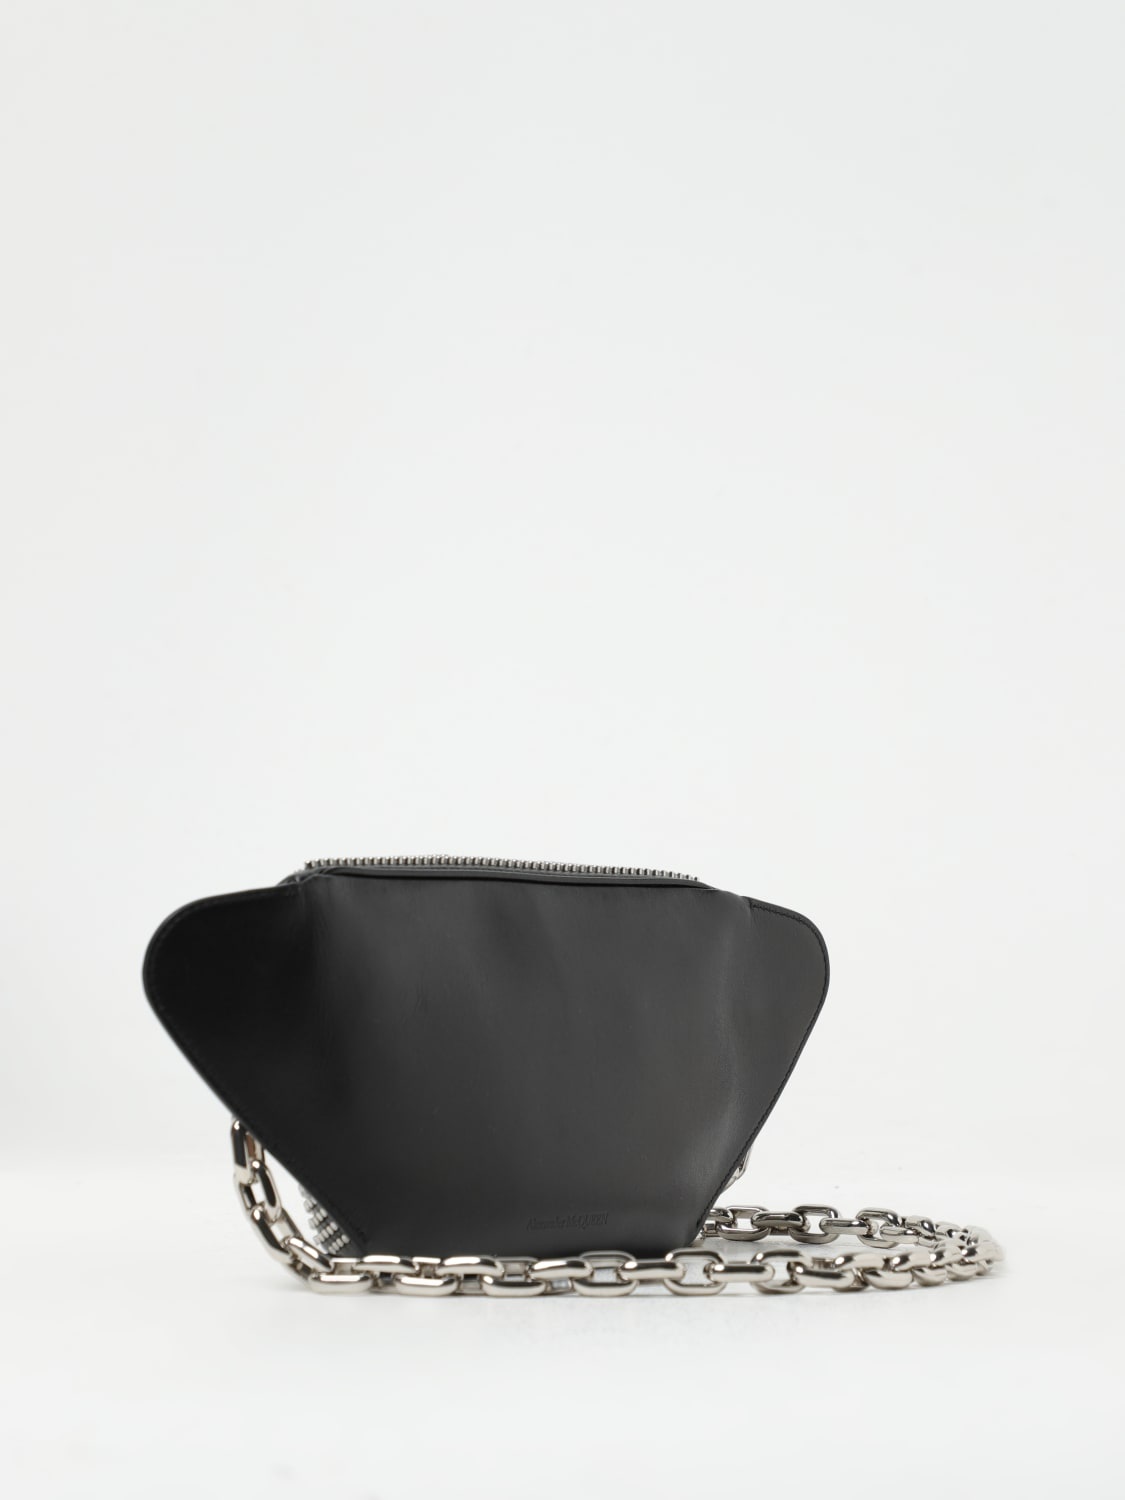 Alexander McQueen leather belt bag with all-over studs - 3